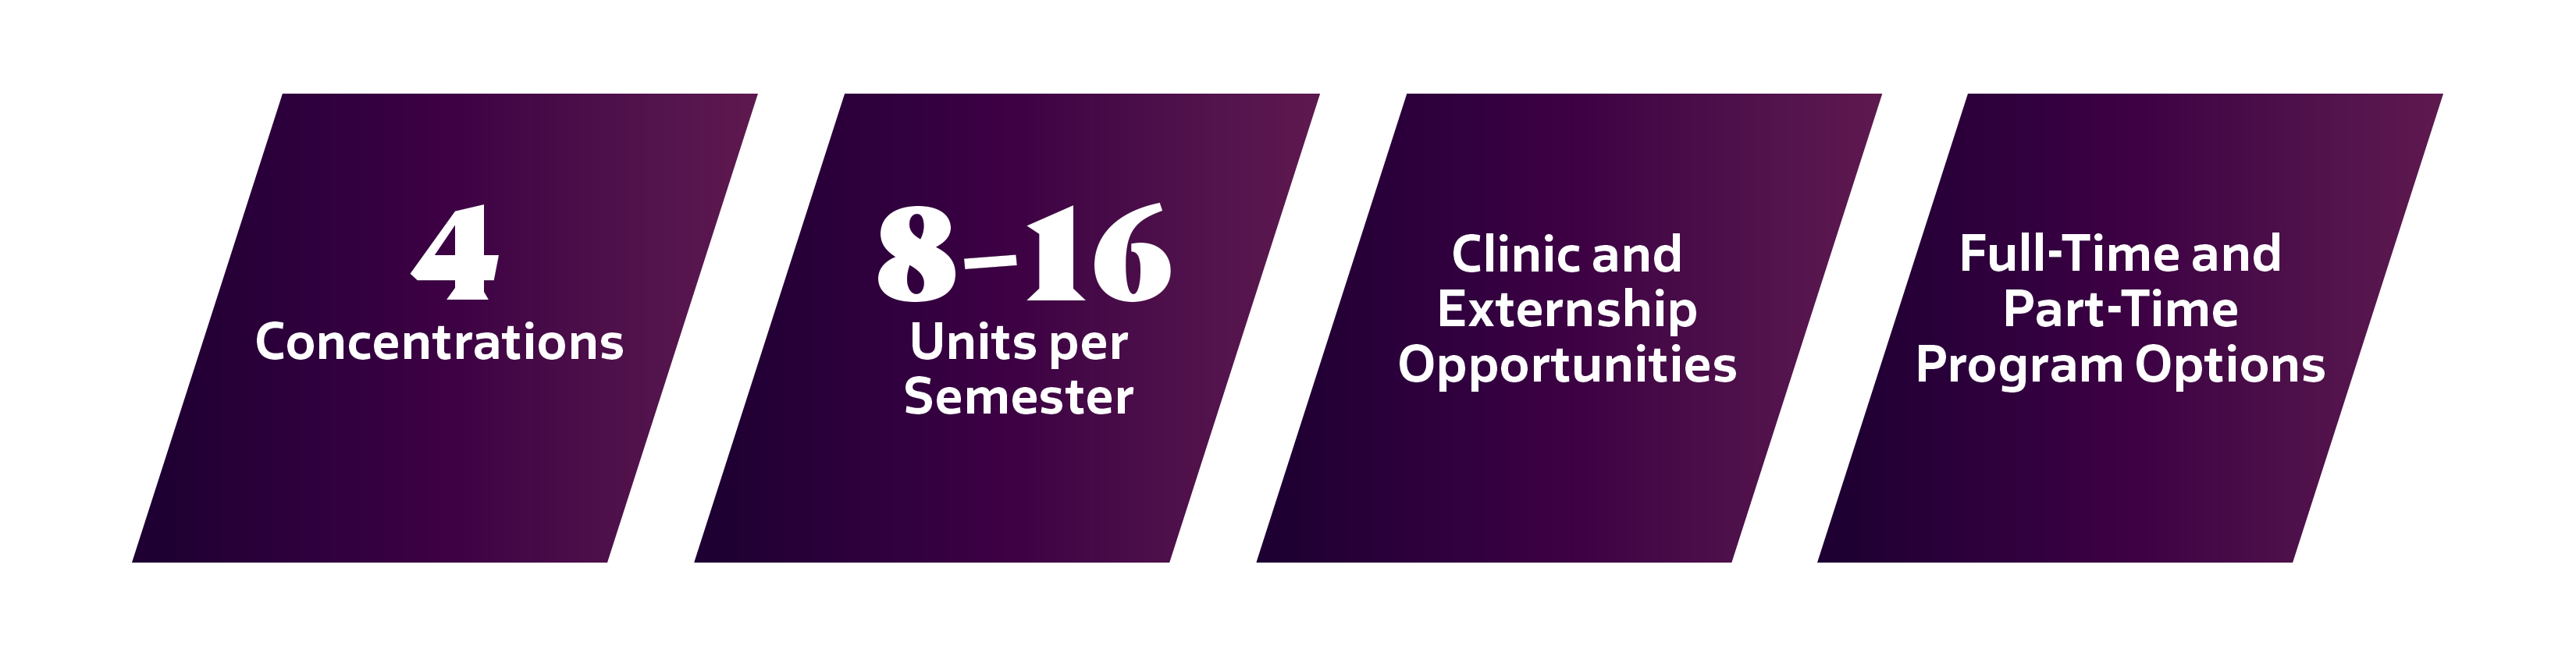 4 concentrations, 8-16 units per semester, Clinic and Externship Opportunities, Full-Time and Part-Time Program Options